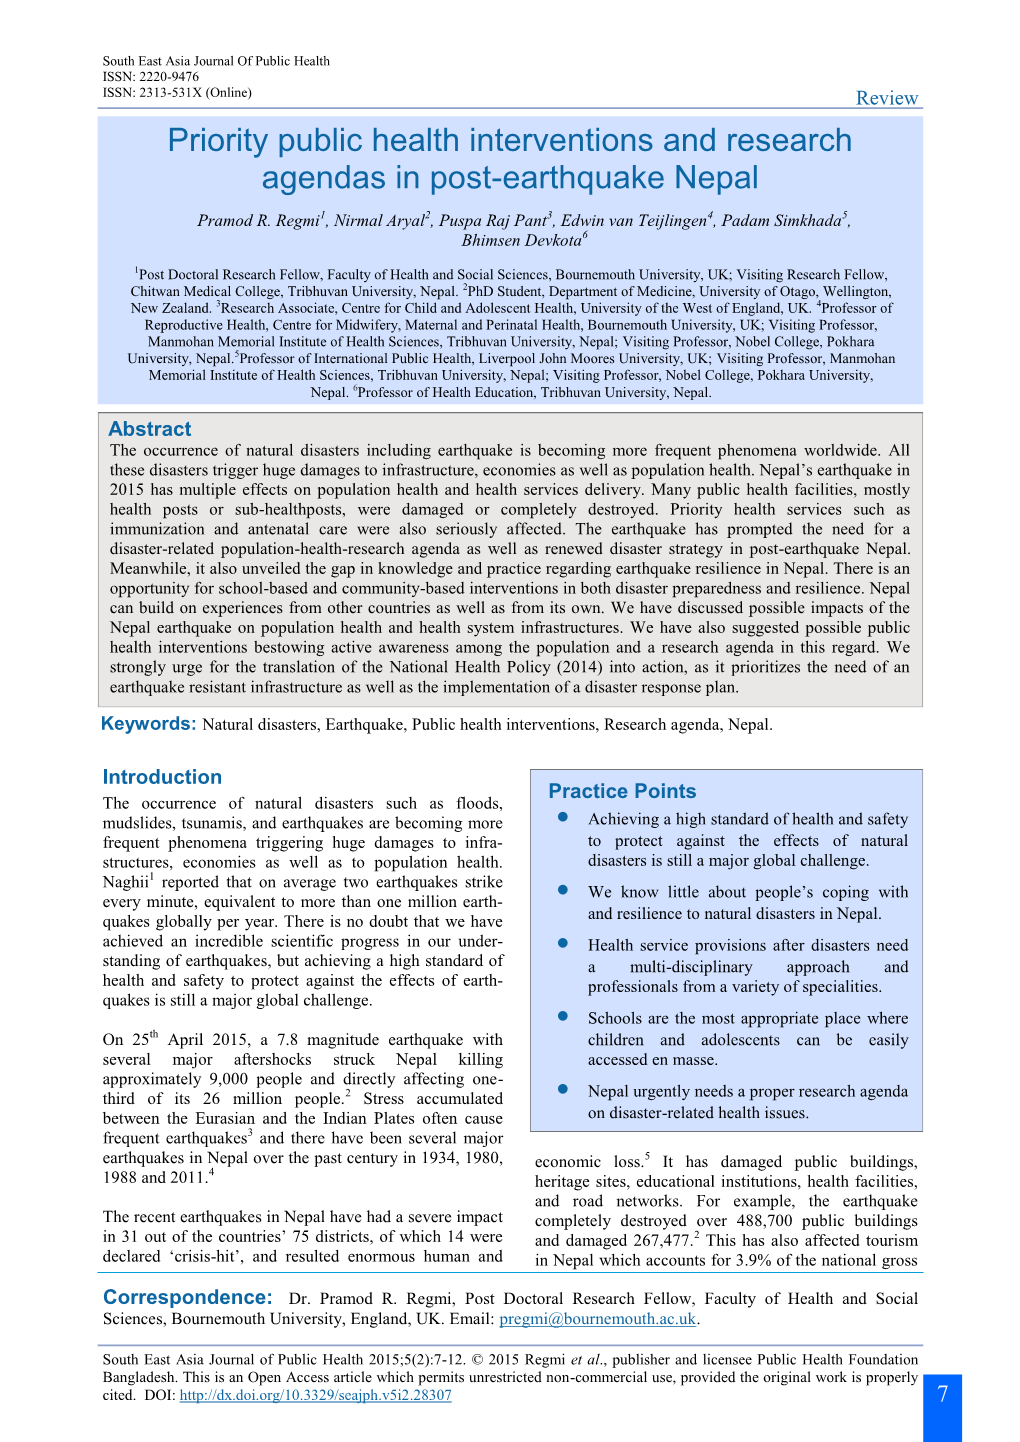 Priority Public Health Interventions and Research Agendas in Post-Earthquake Nepal